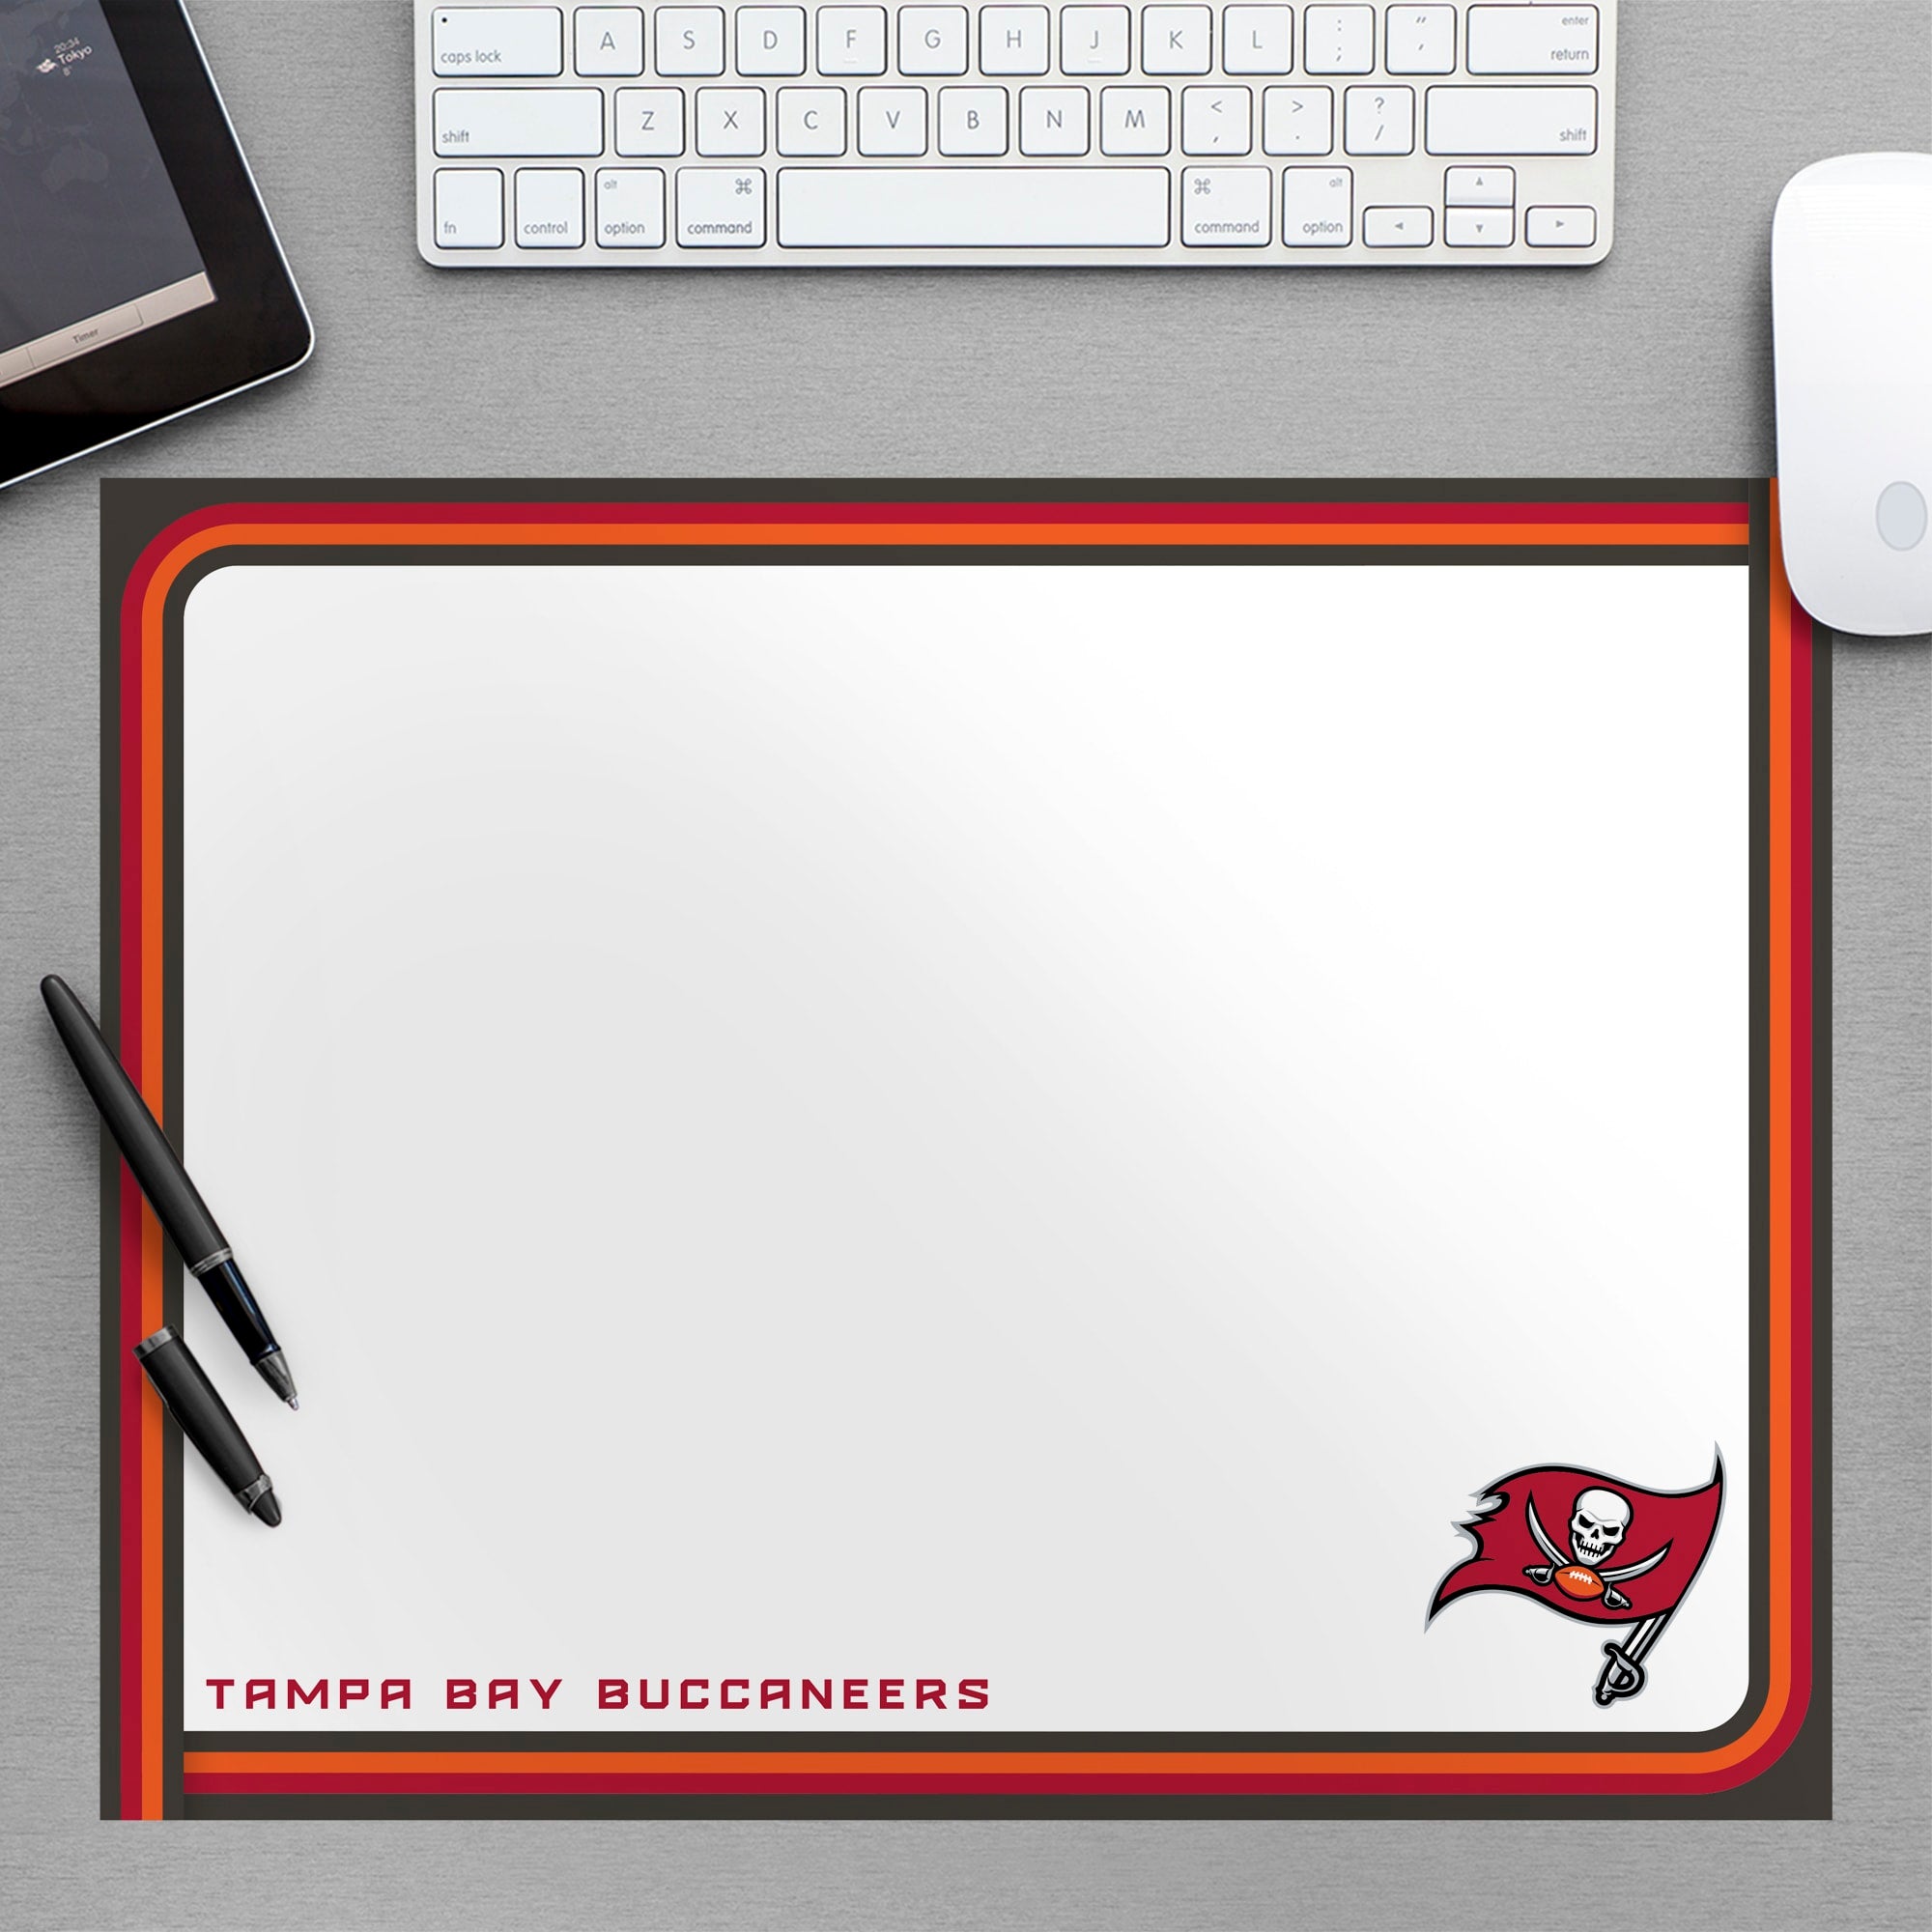 Tampa Bay Buccaneers: Dry Erase Whiteboard - Officially Licensed NFL Removable Wall Decal Large by Fathead | Vinyl